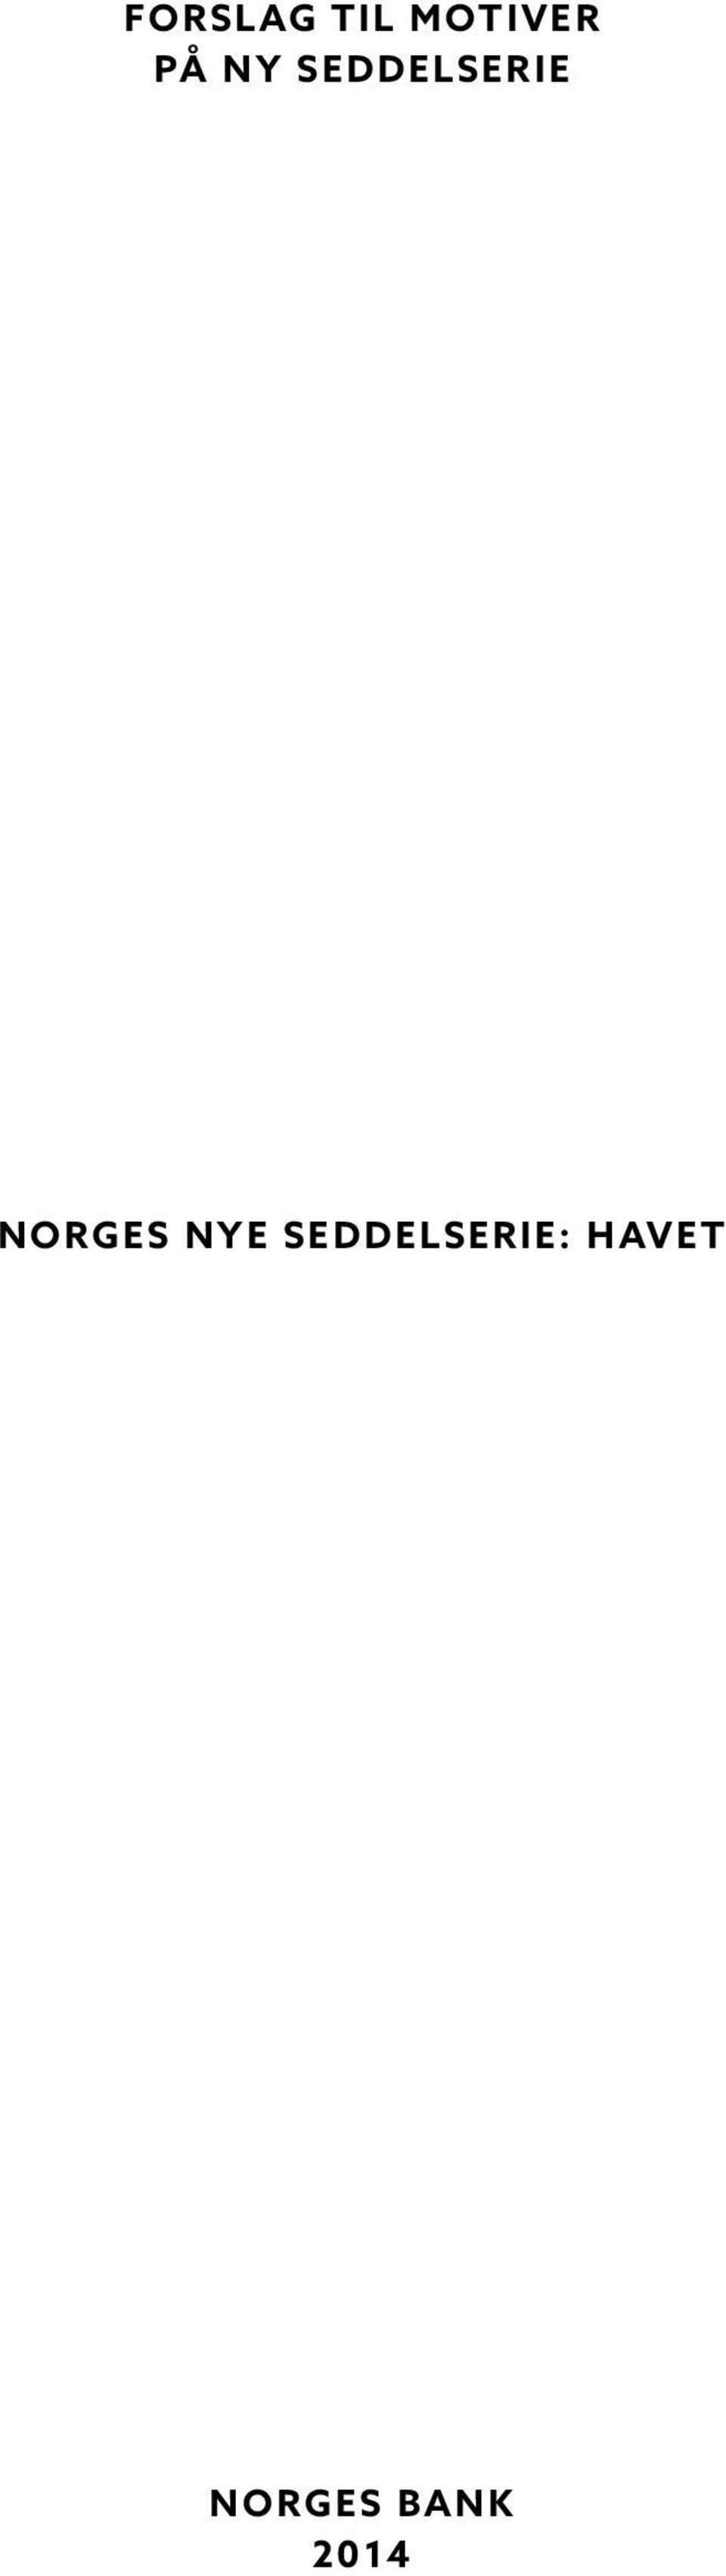 NORGES NYE